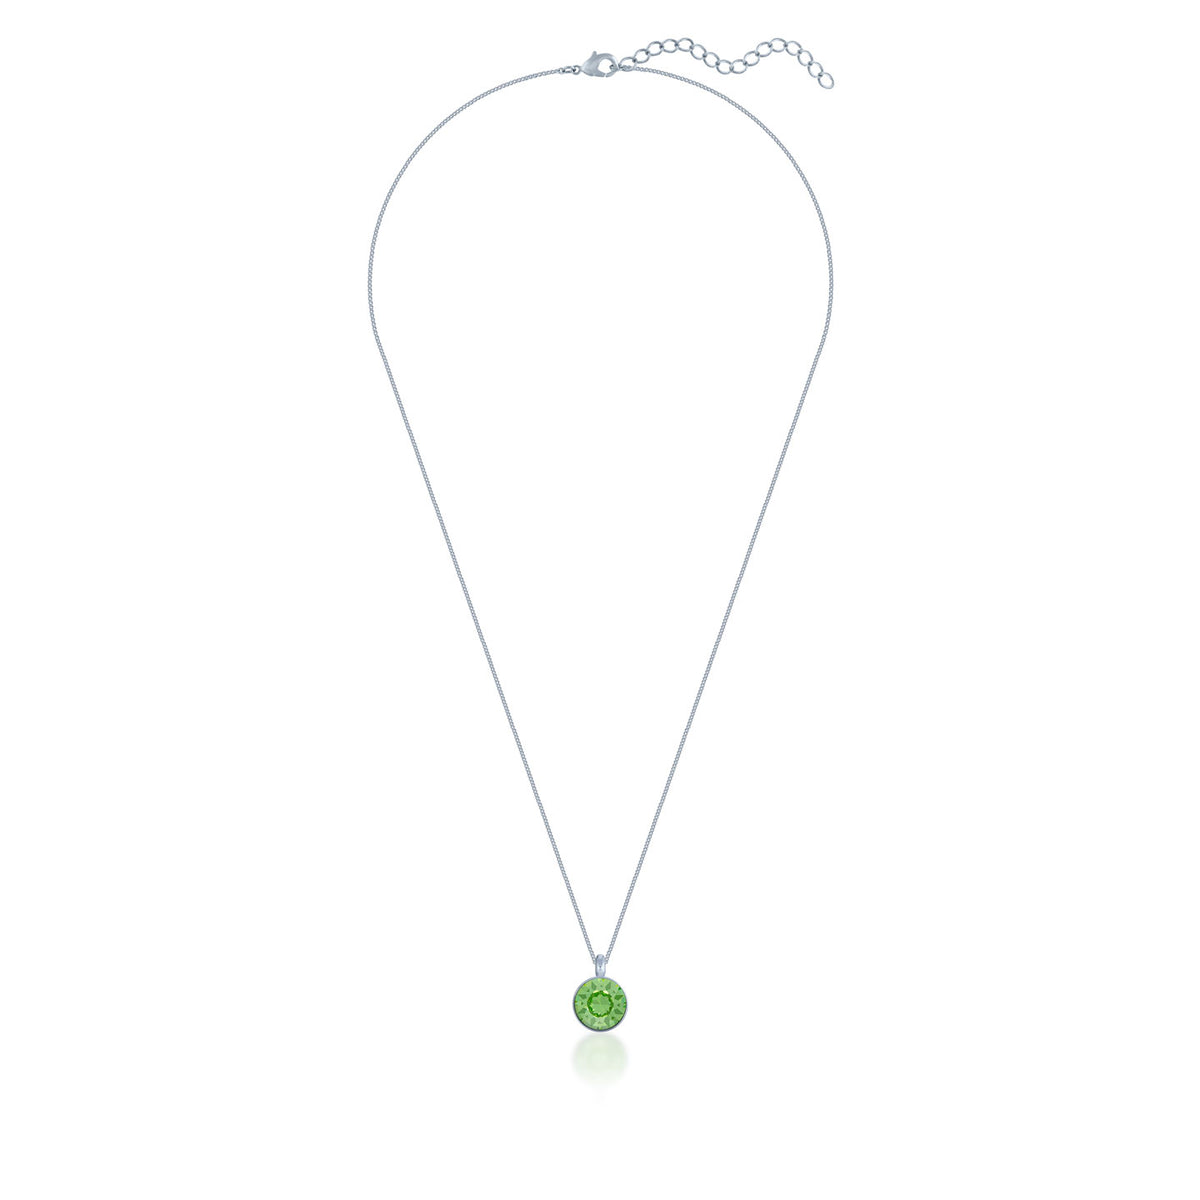 Bella Pendant Necklace with Green Peridot Round Crystals from Swarovski Silver Toned Rhodium Plated - Ed Heart